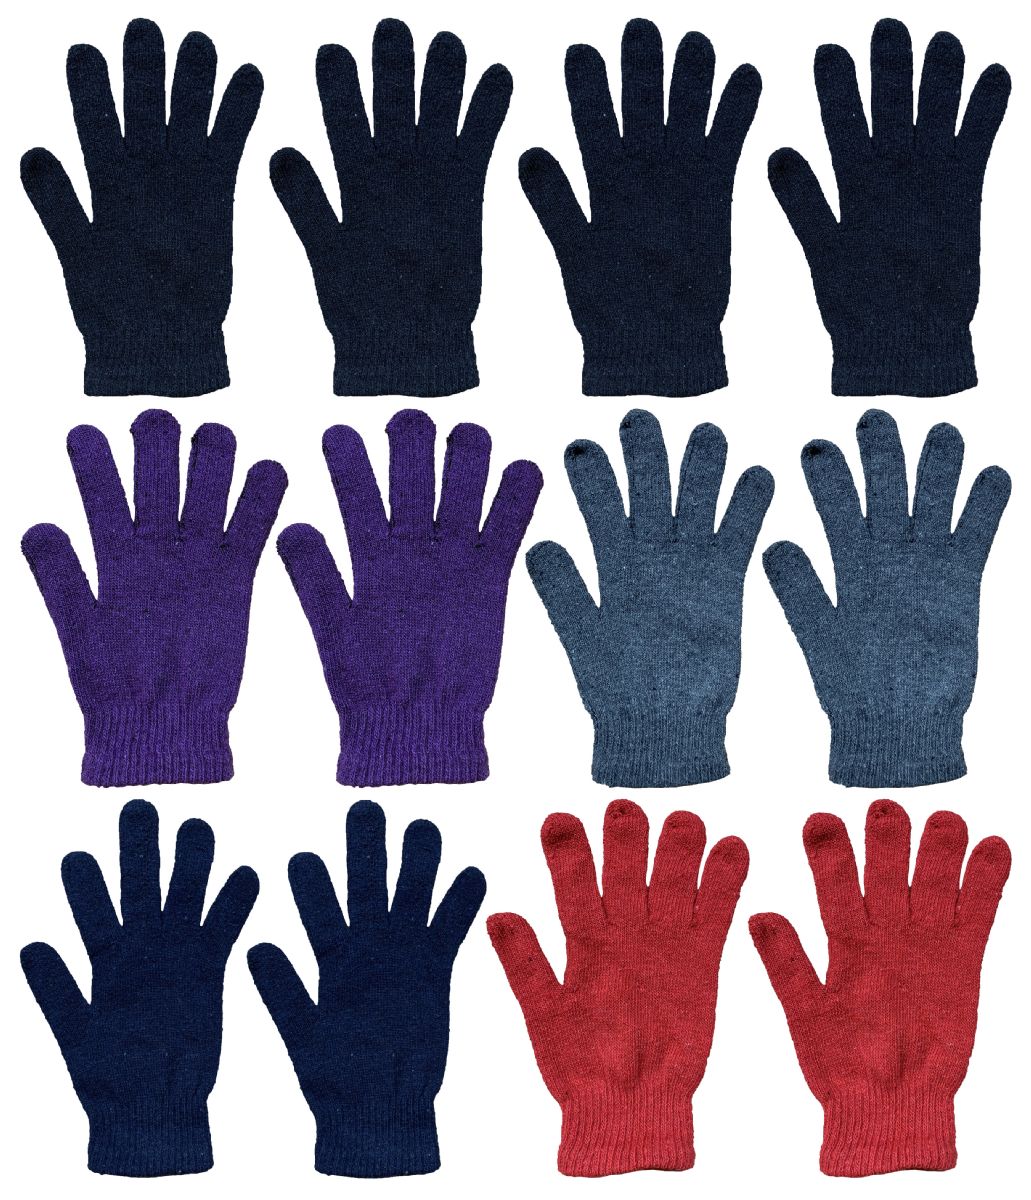 480 Wholesale Yacht & Smith Kids Warm Winter Colorful Magic Stretch Gloves Ages 2-8 Bulk Pack